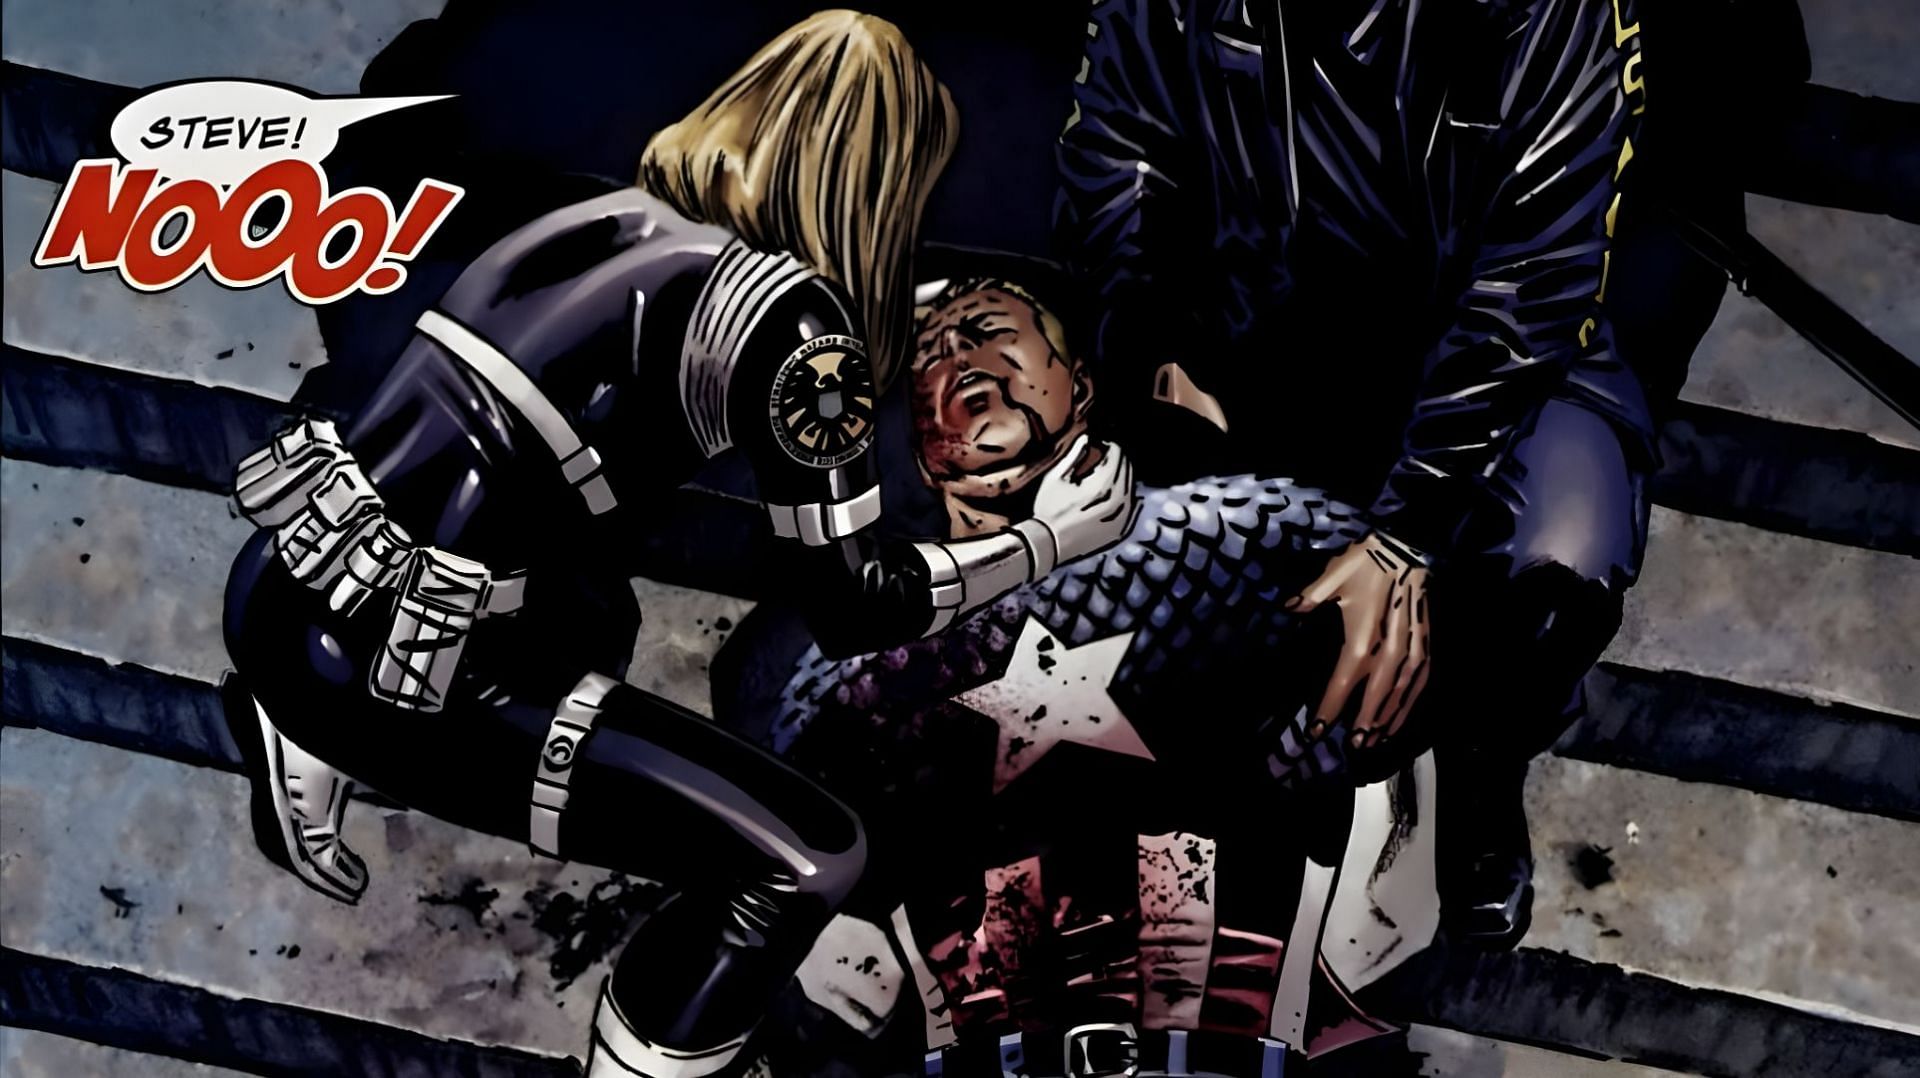 Captain America, formerly known as Steve Rogers, has tragically died in various storylines throughout the universe of comics and film. (Image via Marvel)